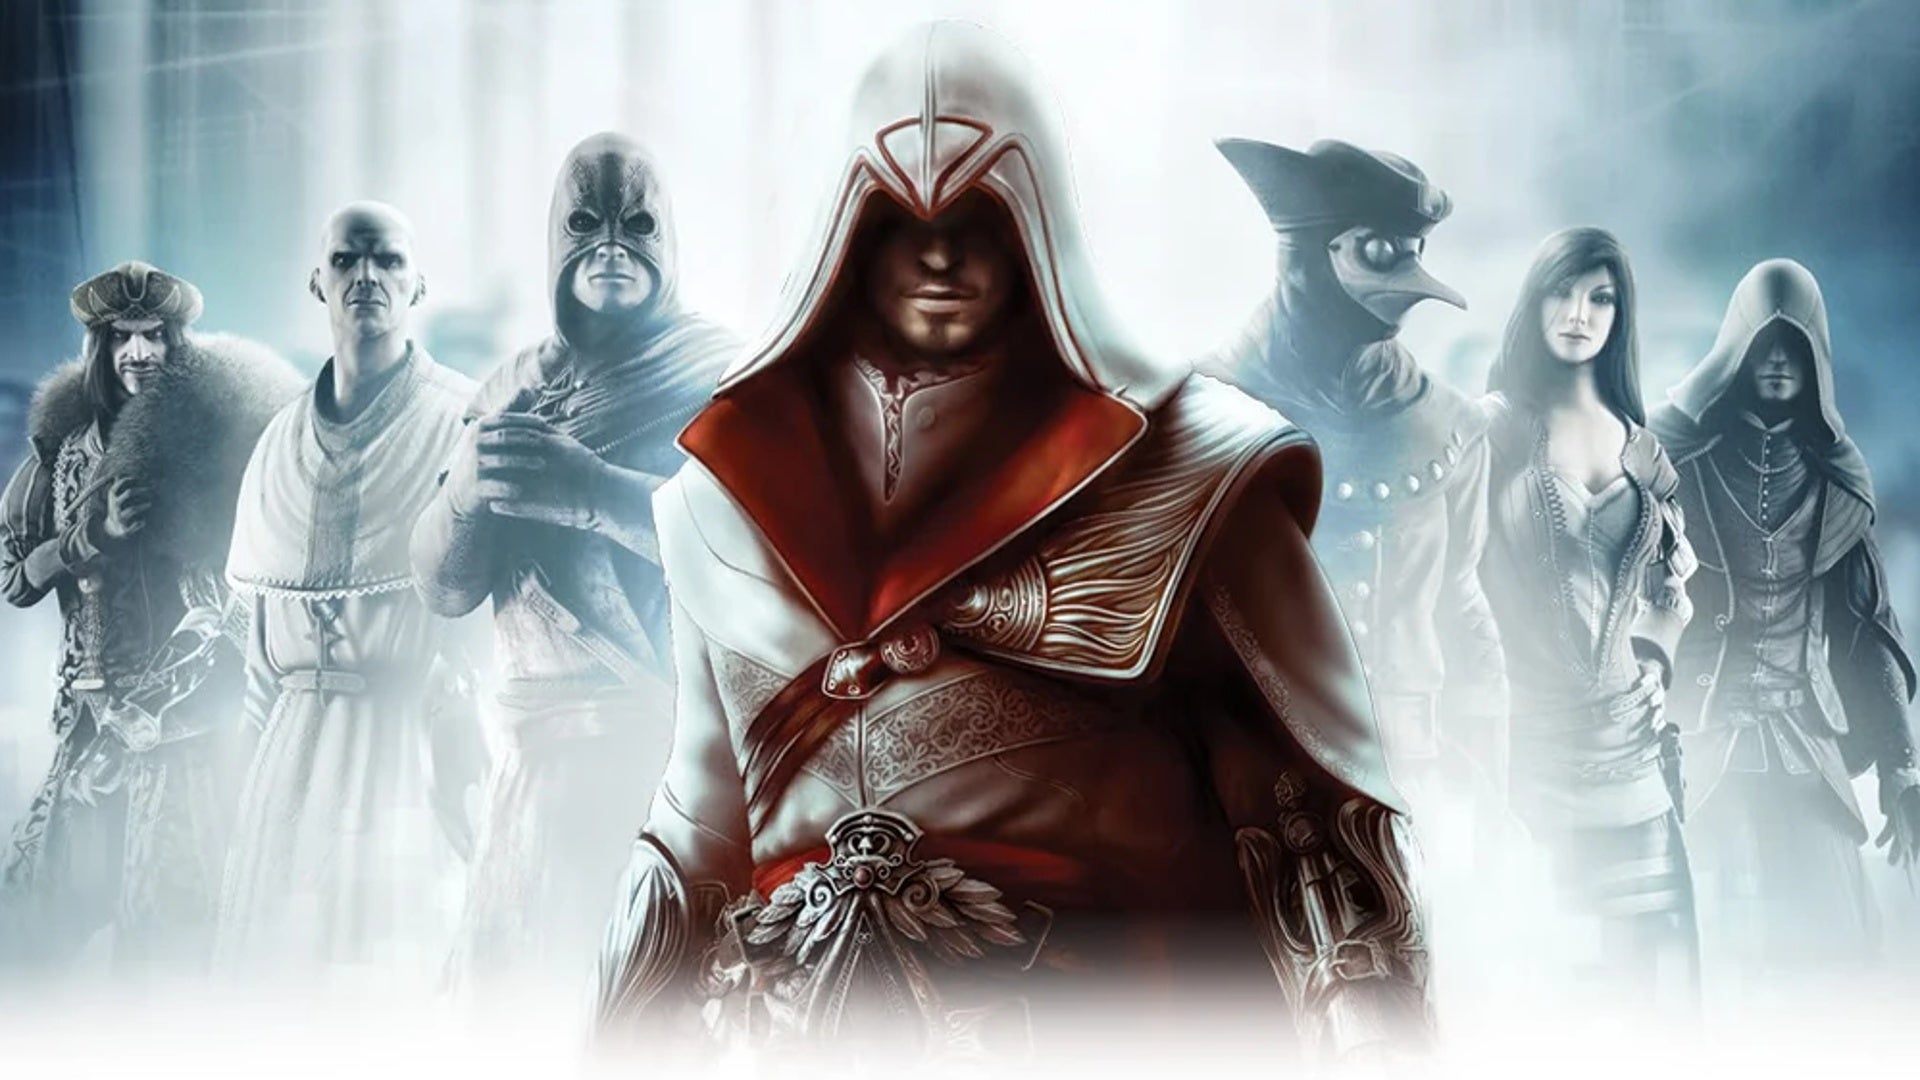 Assassin's Creed Brotherhood's online features will be deactivated from October 1st, 2022.